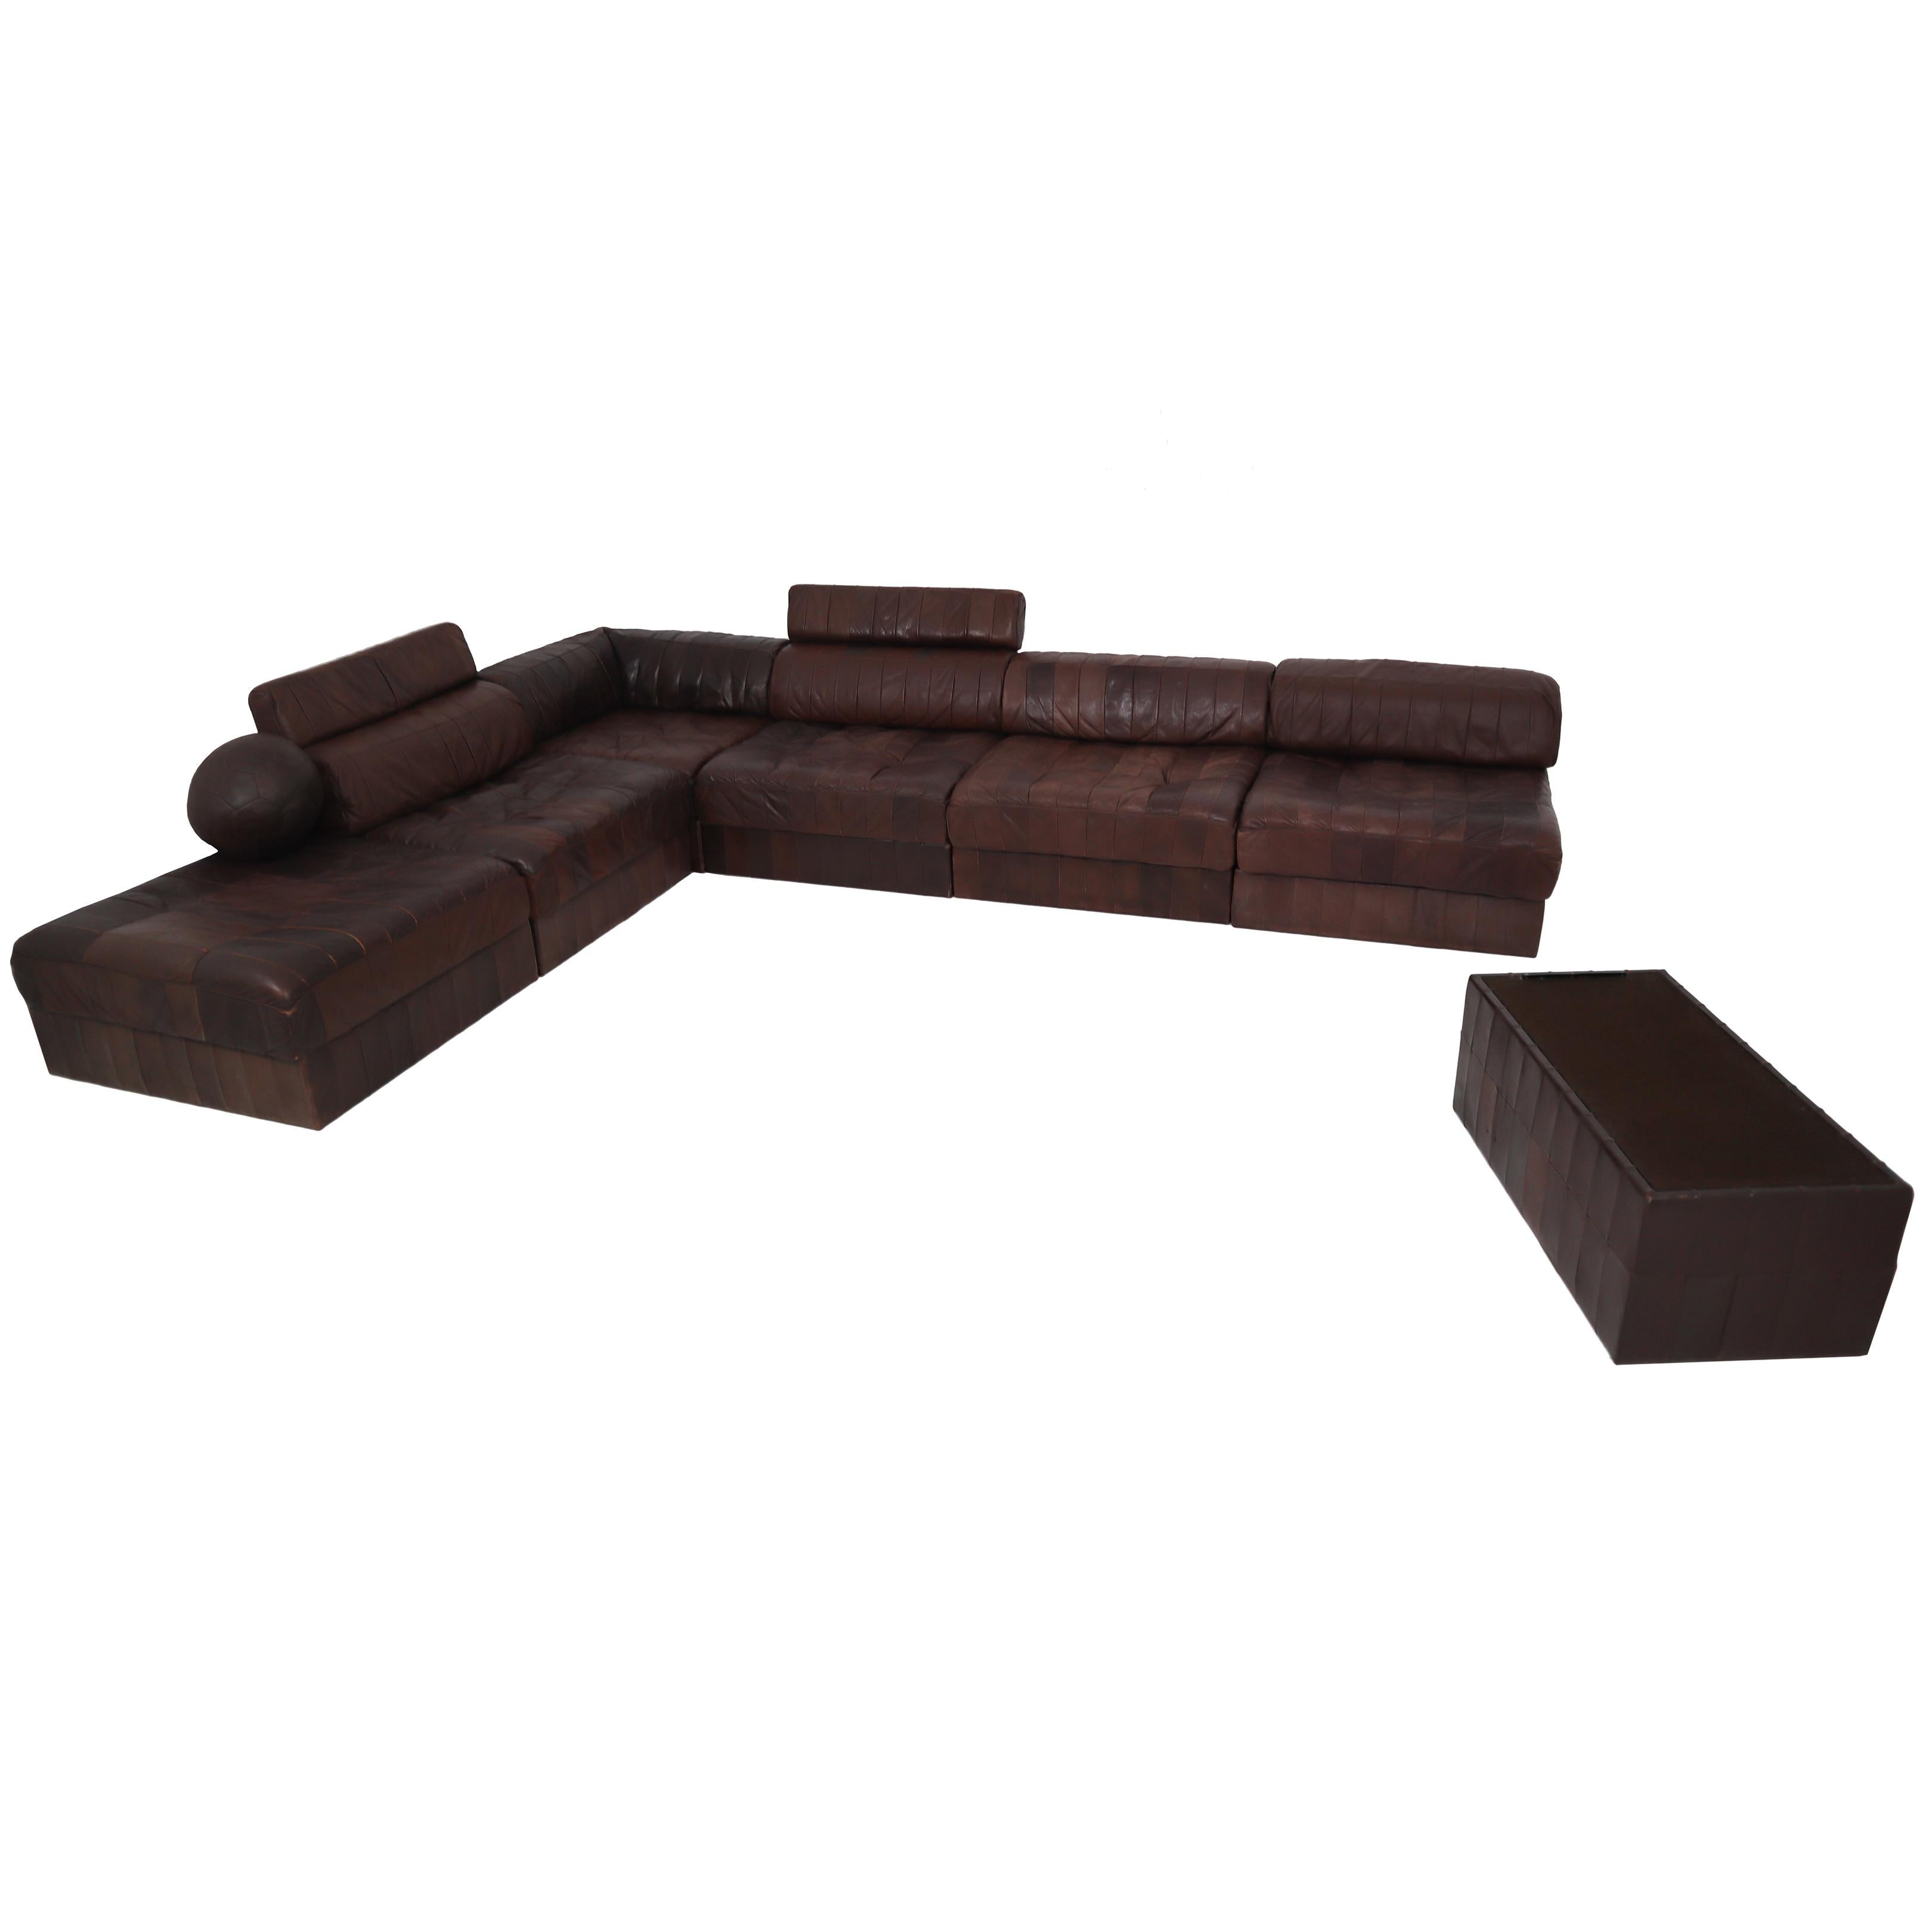 We are delighted to bring to you an original and extremely desirable De Sede DS 88 sectional sofa in patchwork brown-cognac aniline leather with bolster cushions. Hand built in the 1970s to incredibly high standards by De Sede craftsman in